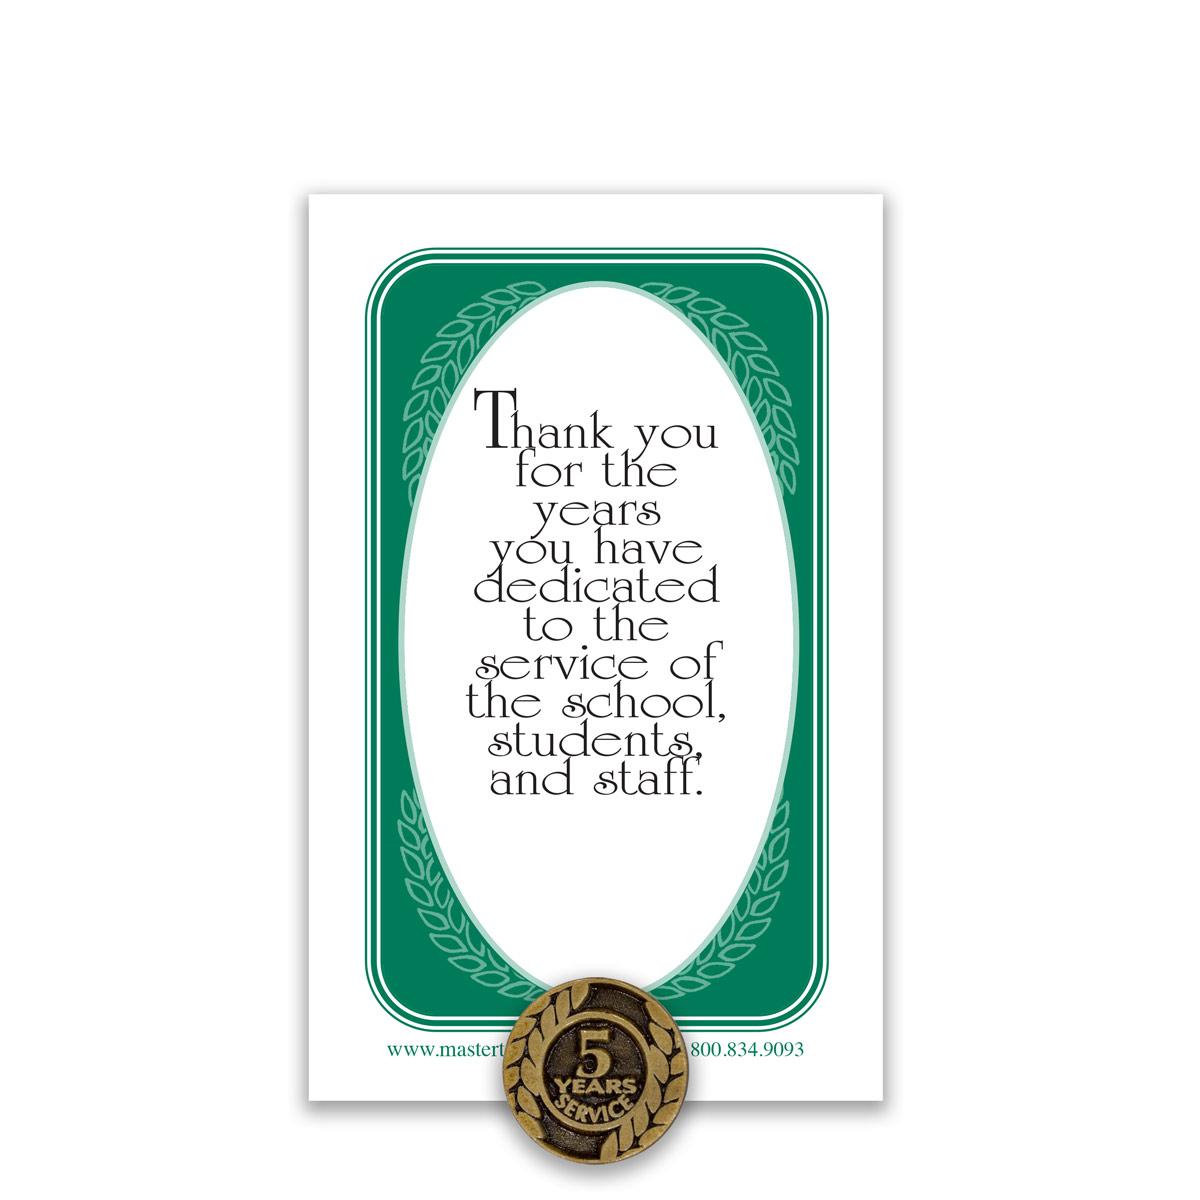 5 Years of Service Antique Gold Tone Lapel Pin with Thank You Message